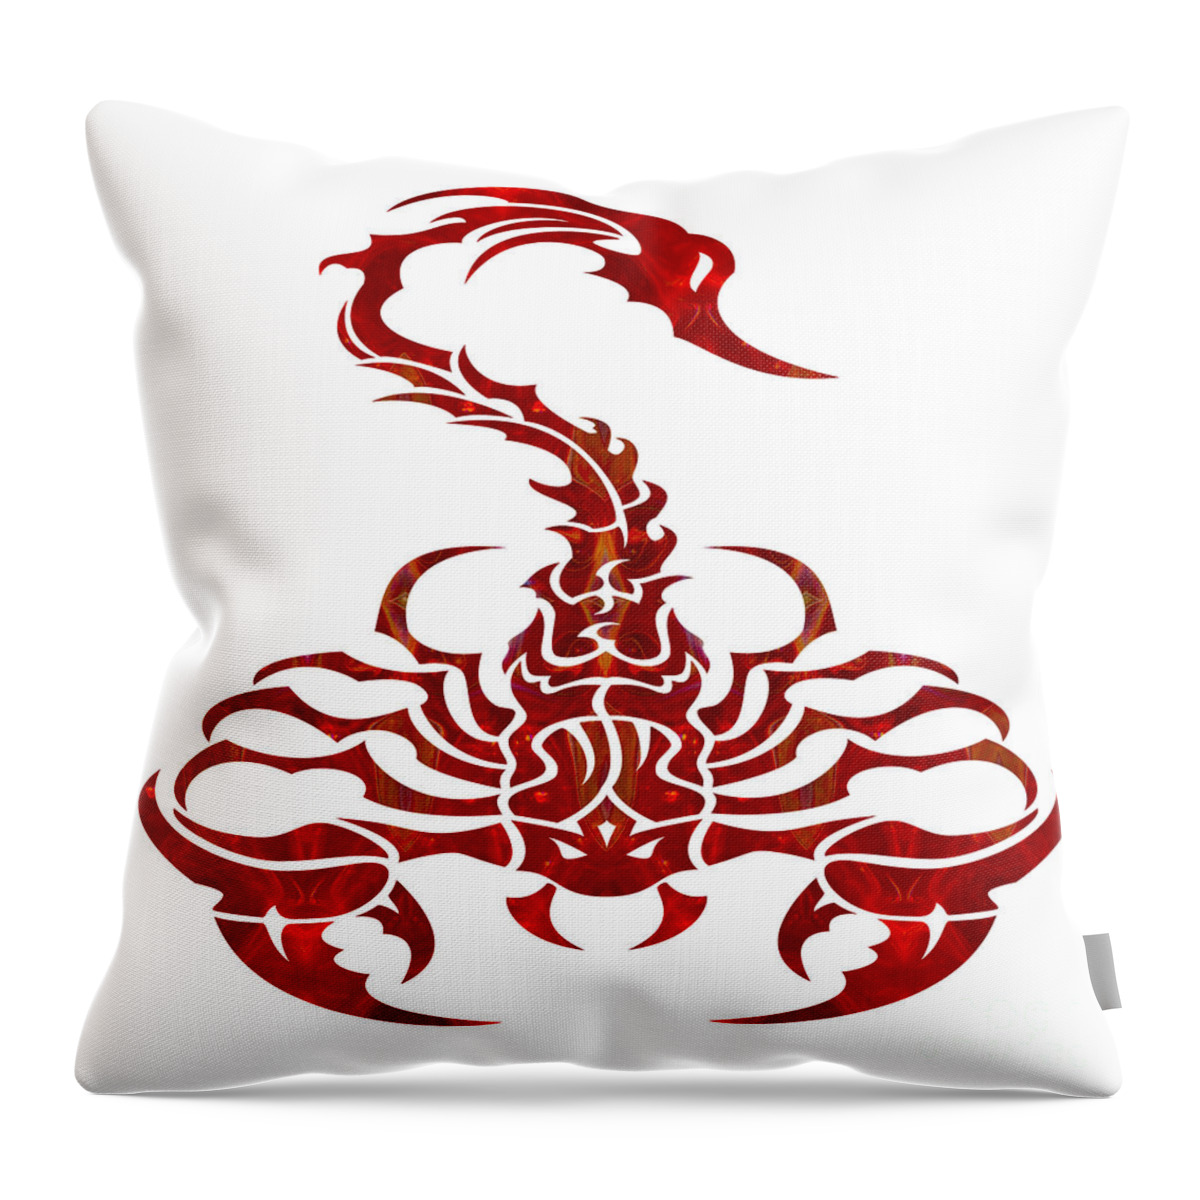 1x1 Throw Pillow featuring the digital art Red Scorpion Fantasy Designs Abstract Holiday Art by Omaste Witk by Omaste Witkowski